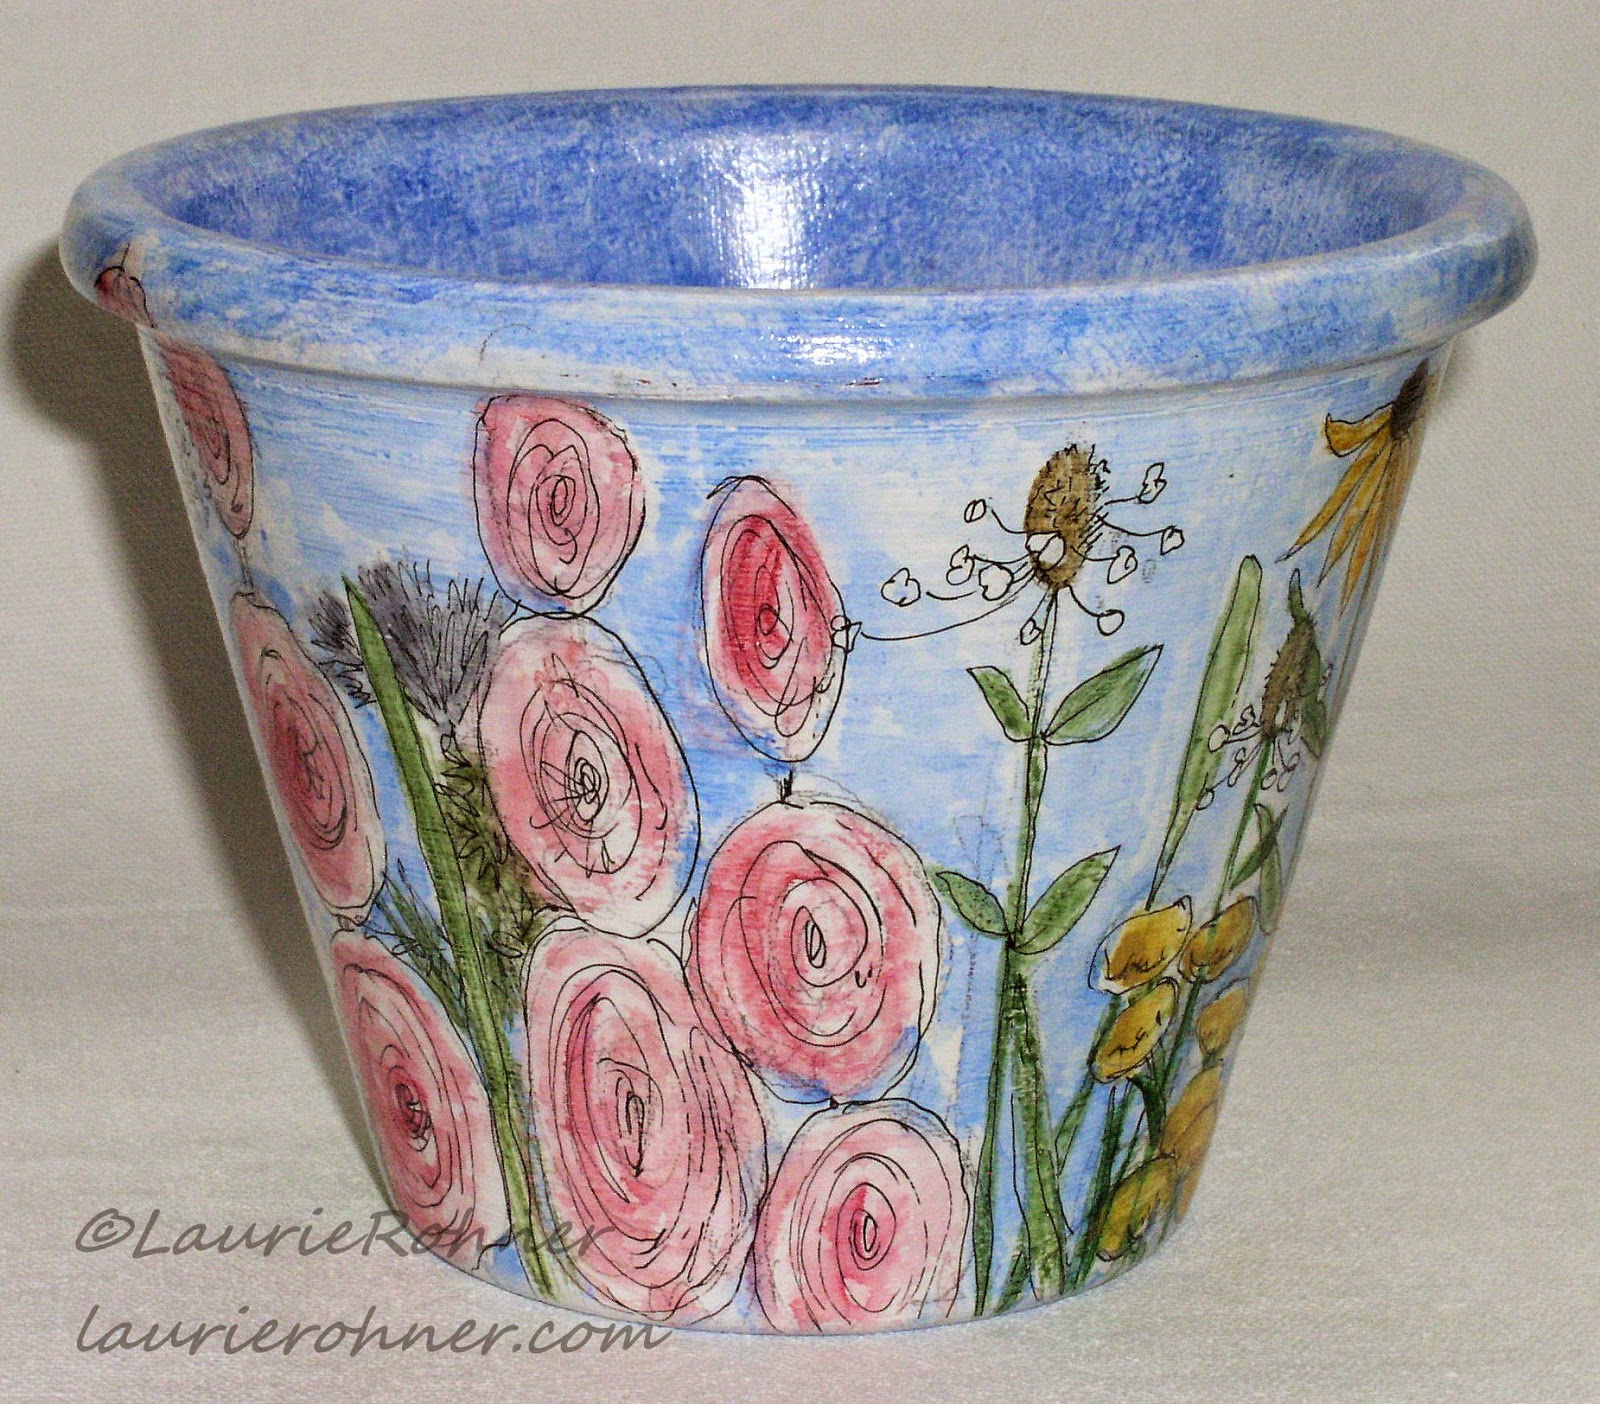  hand painted garden pots and more.